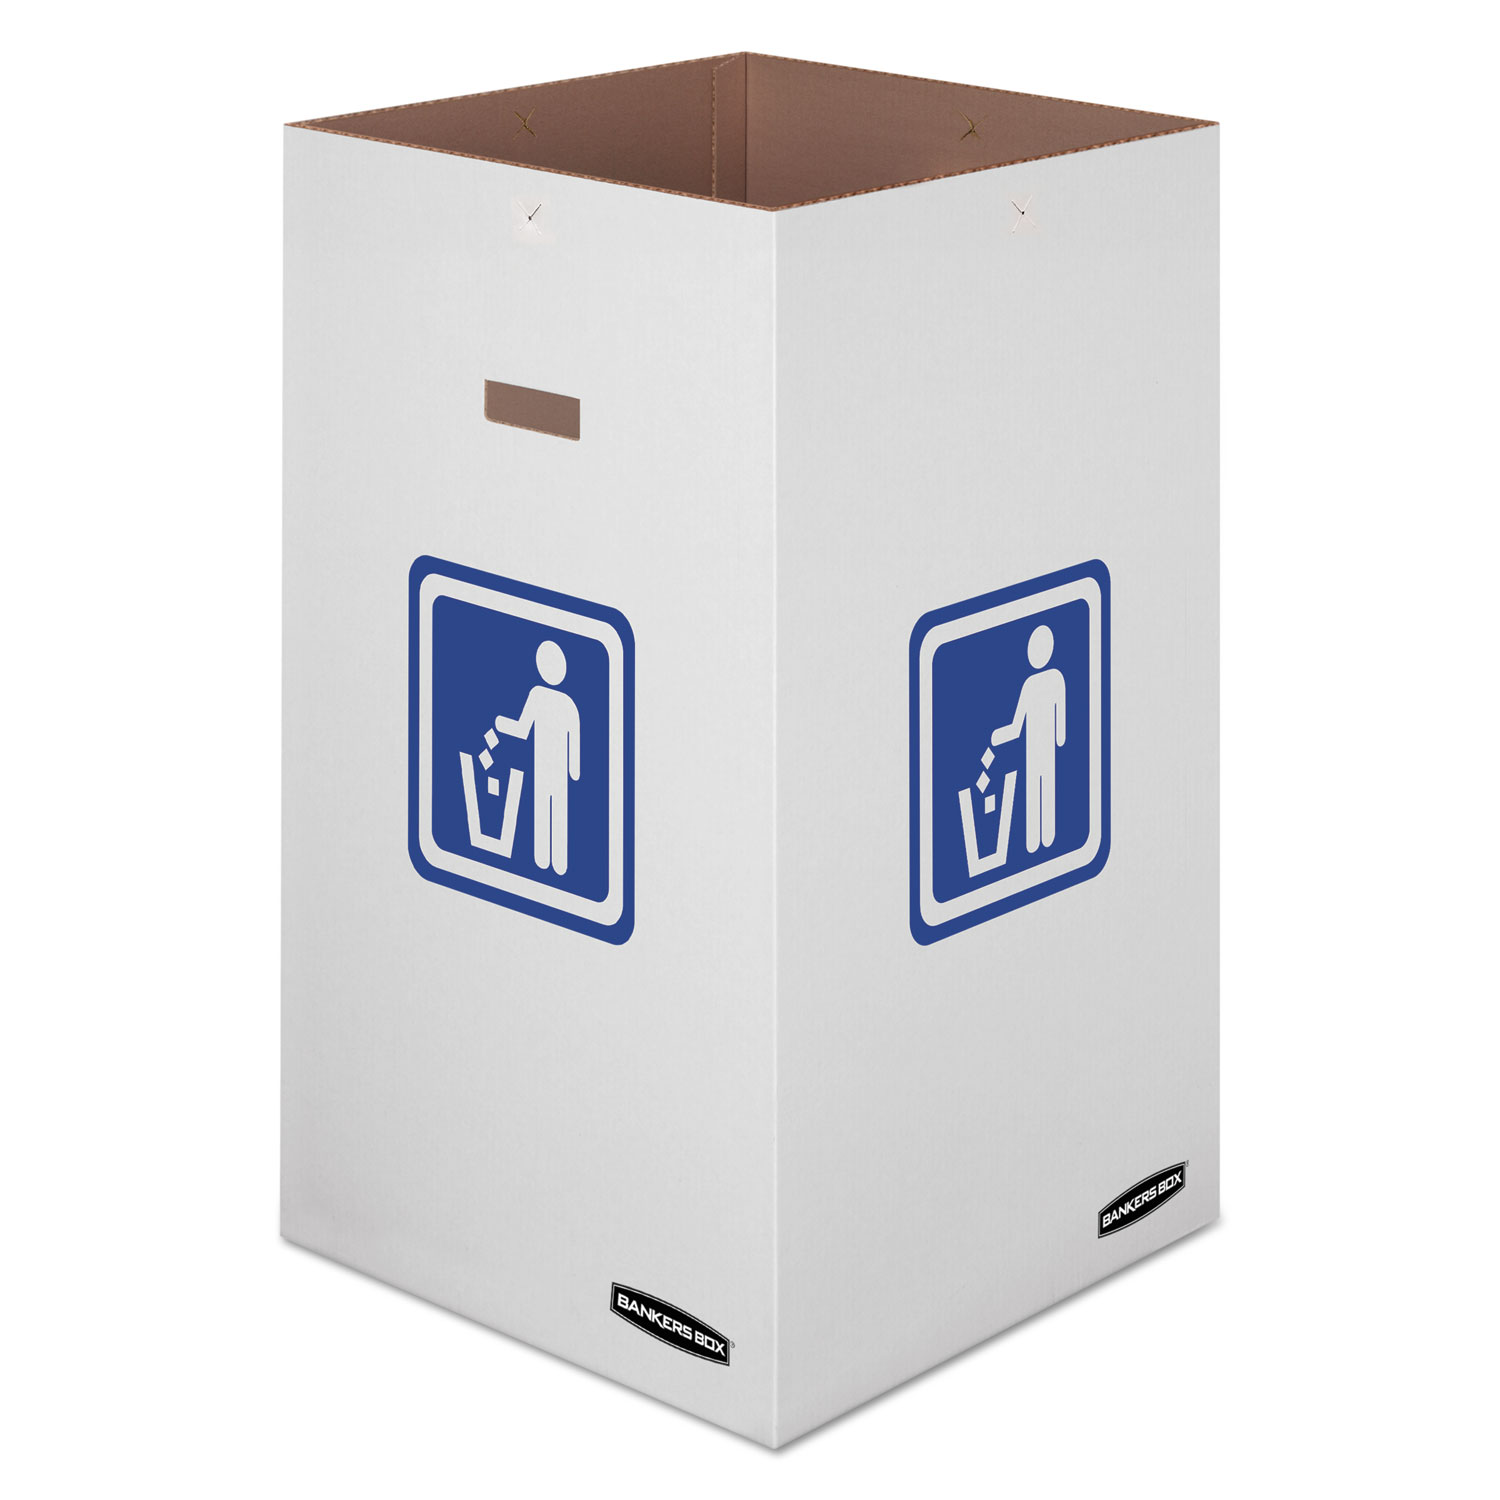  Bankers Box 7320101 Waste and Recycling Bin, 42 gal, White, 10/Carton (FEL7320101) 